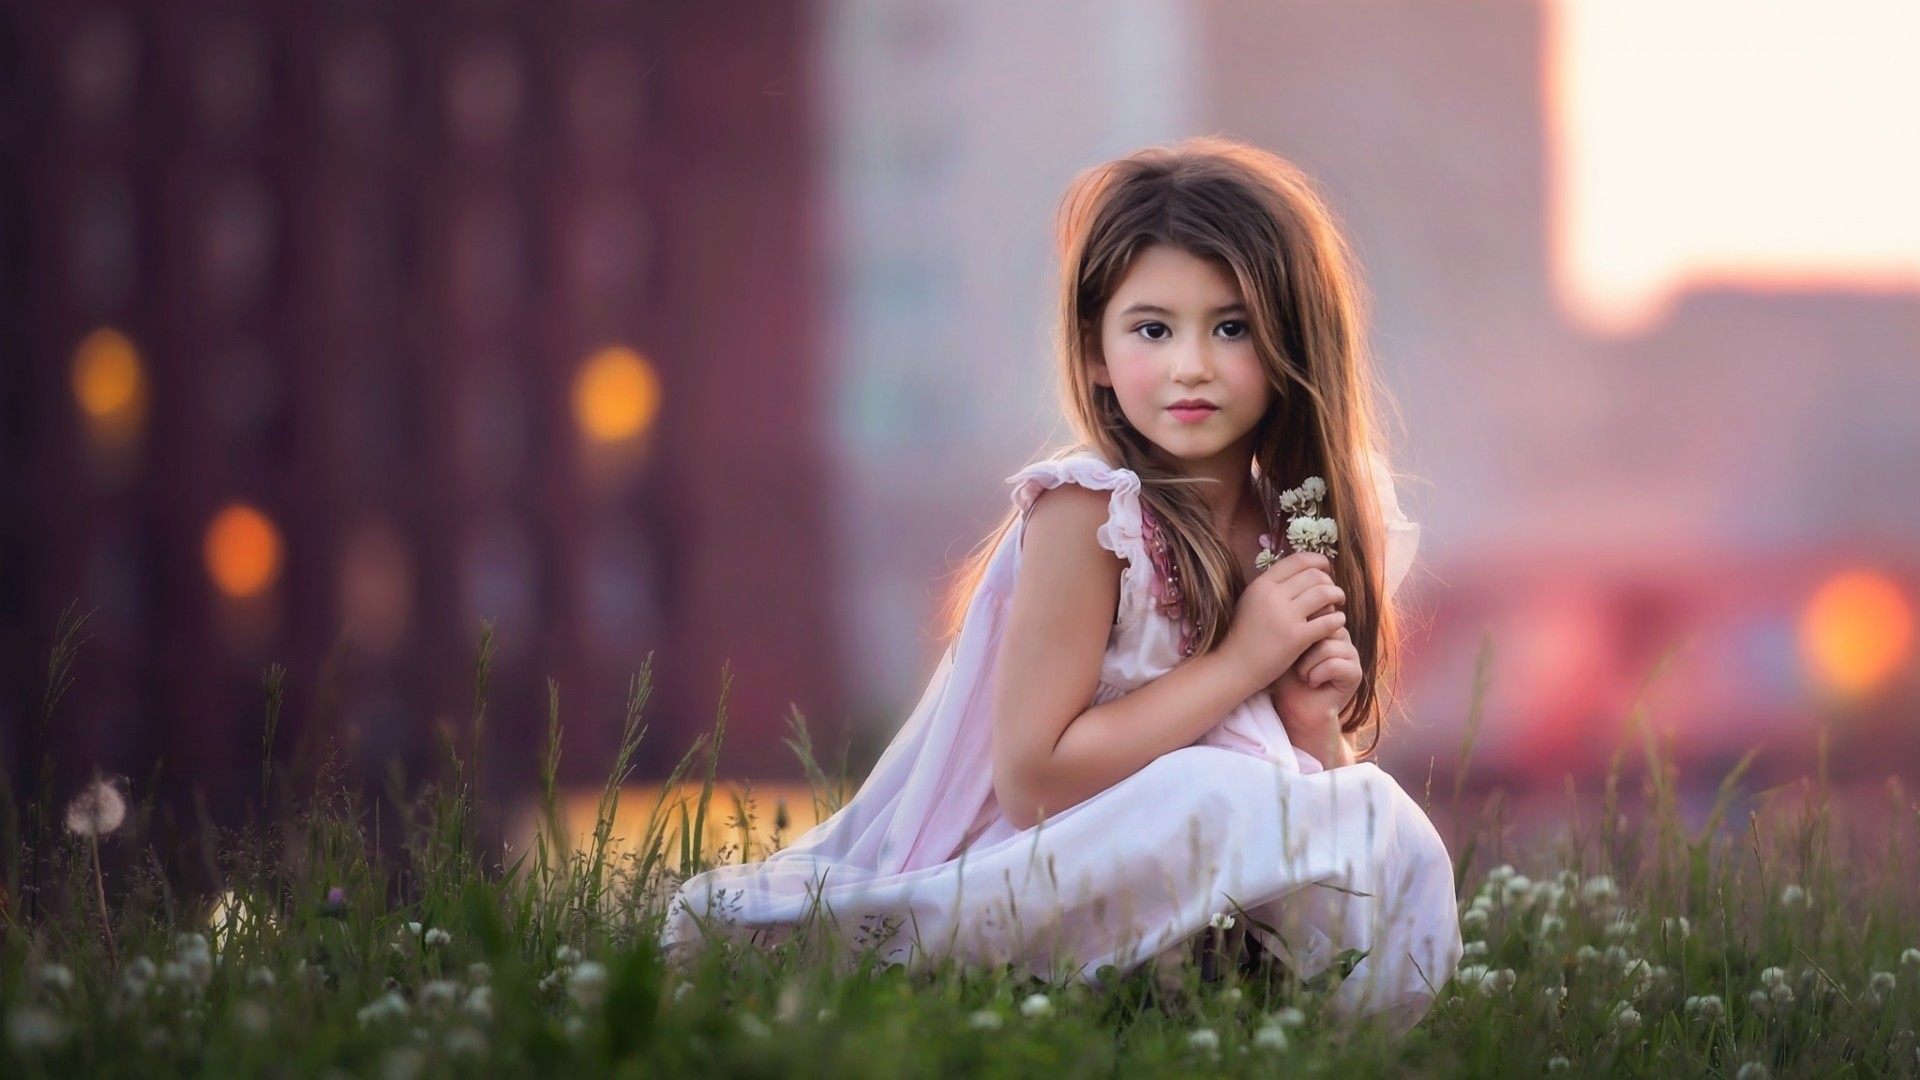 1920x1080 Download hd wallpapers of Sweet girl Cute baby girl wallpapers 